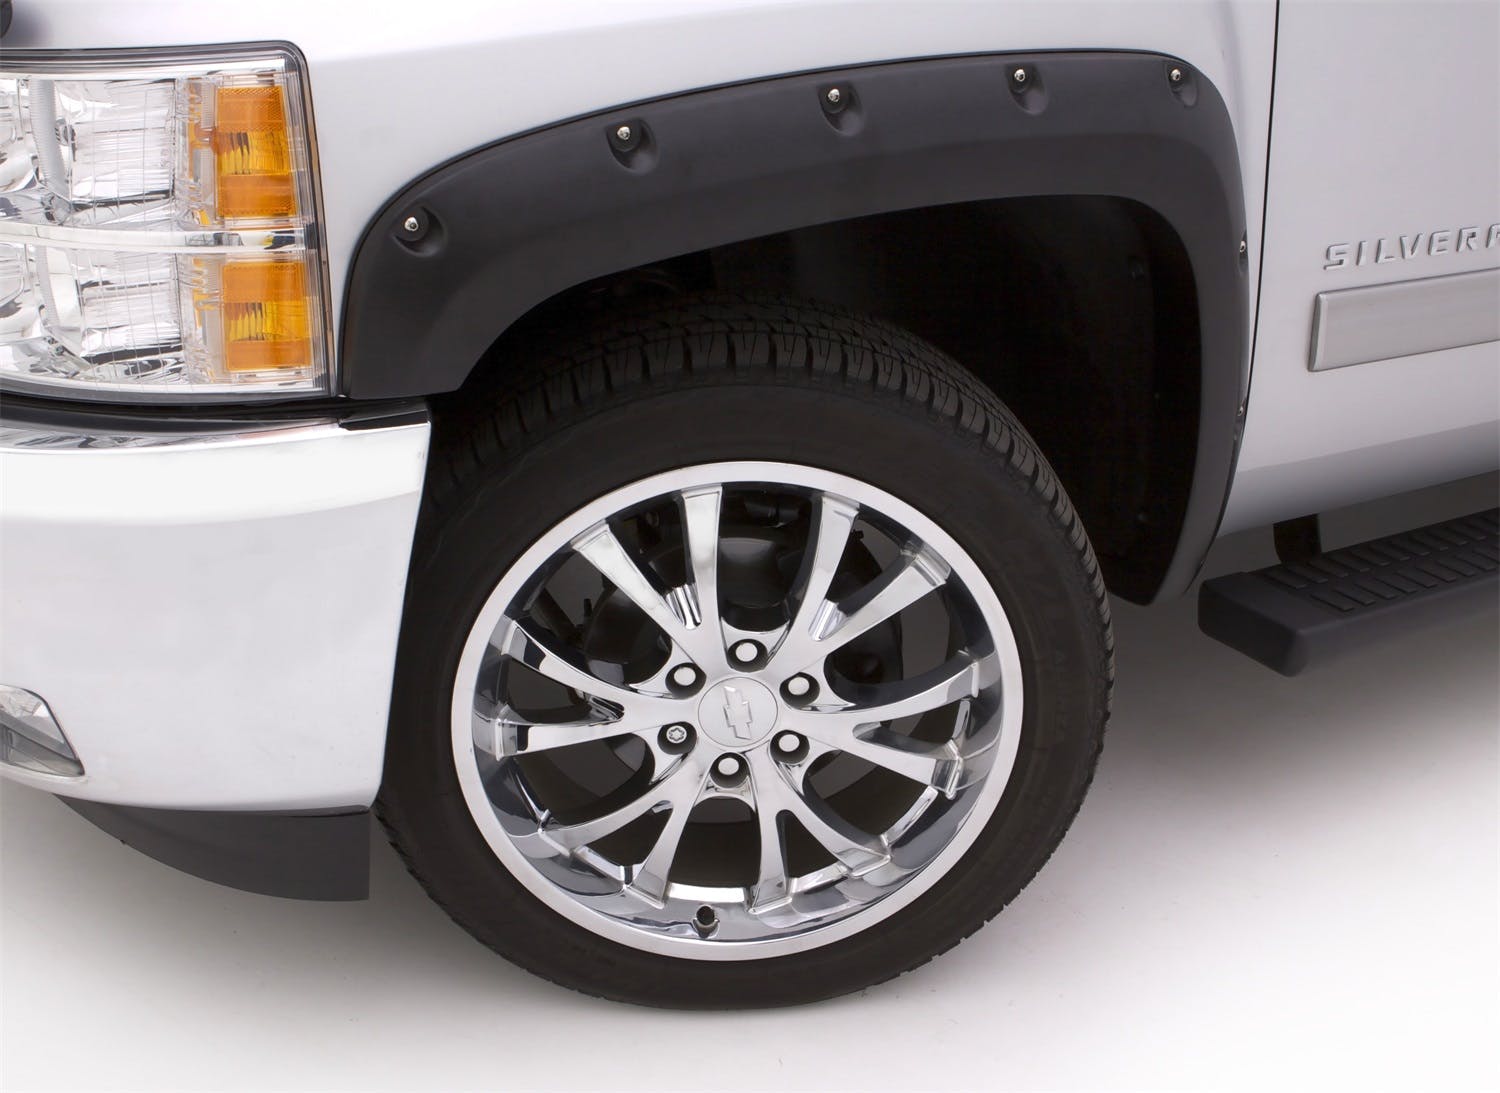 LUND RX105TA RX-Style Fender Flares 2pc Textured RX-RIVET STYLE 2PC TEXTURED